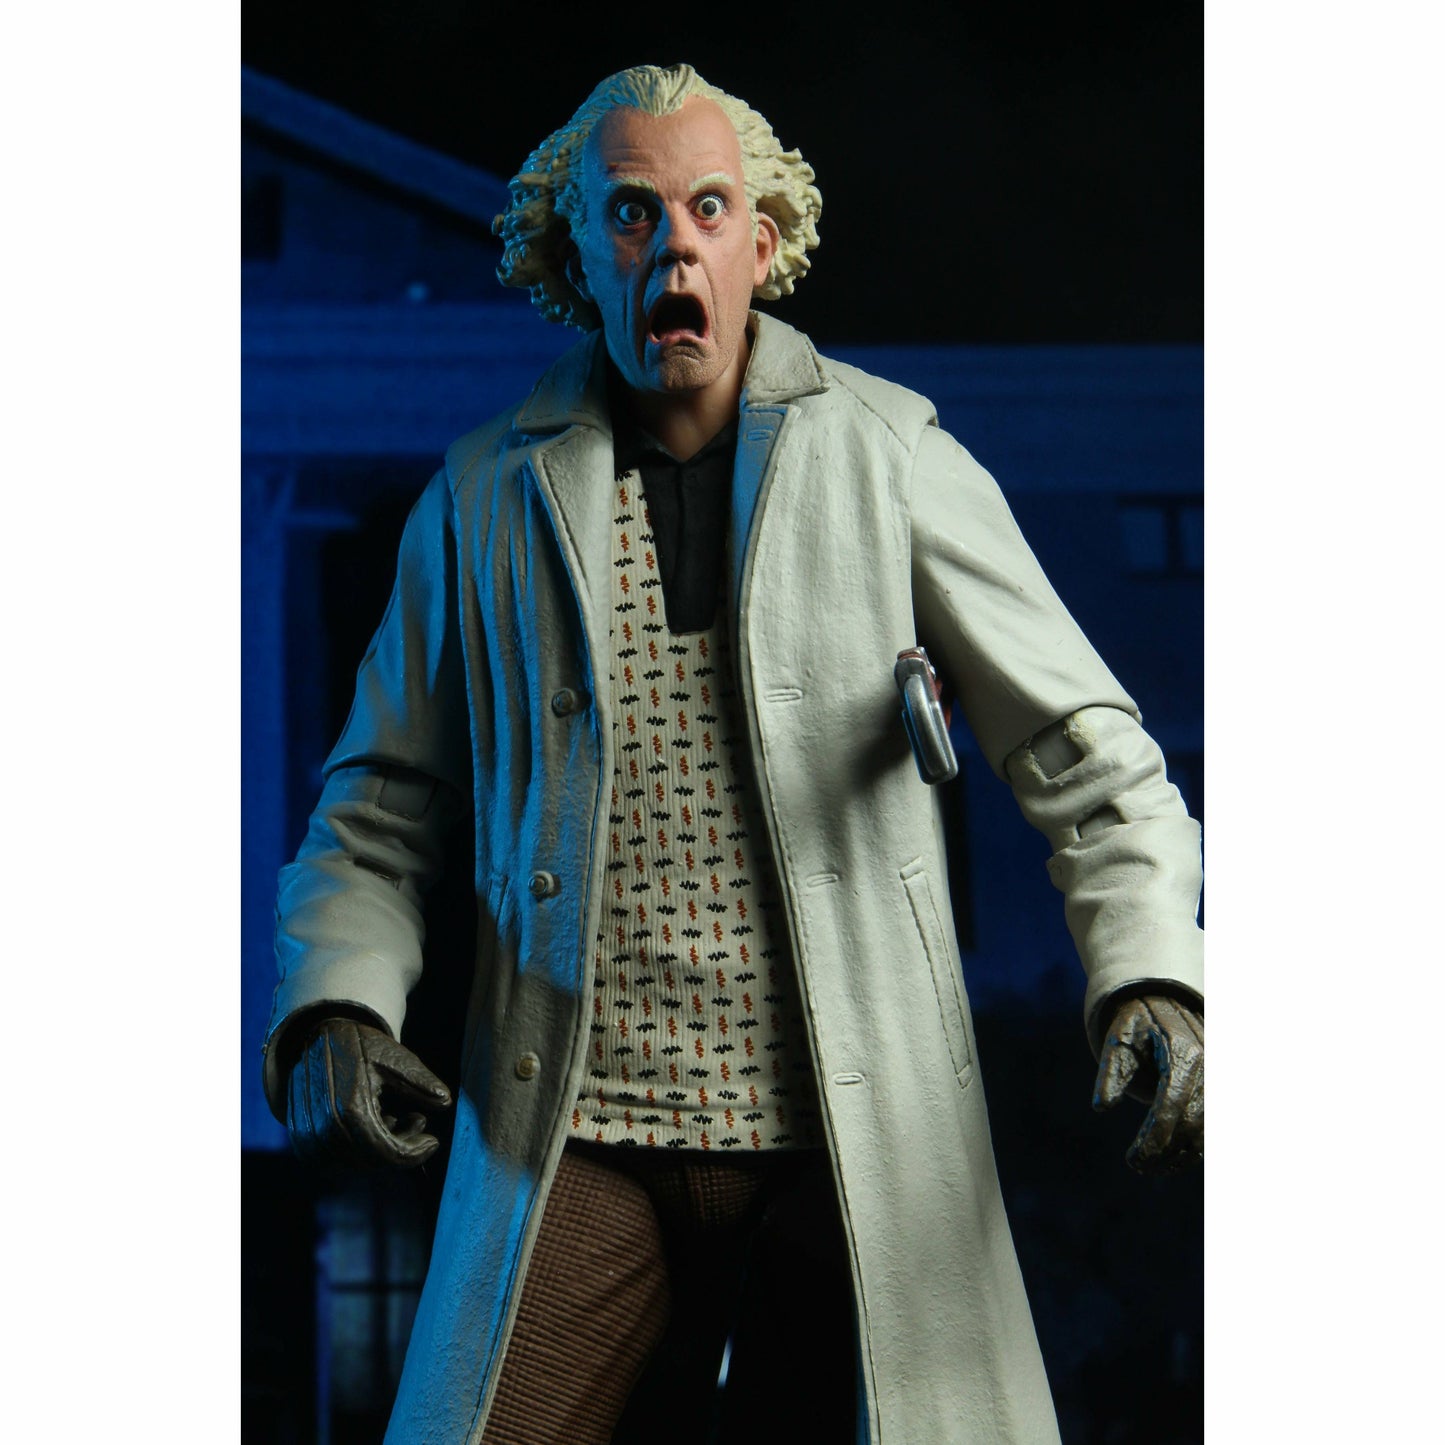 NECA Back to the Future 7" Scale Action Figure - Ultimate Doc Brown (1955)